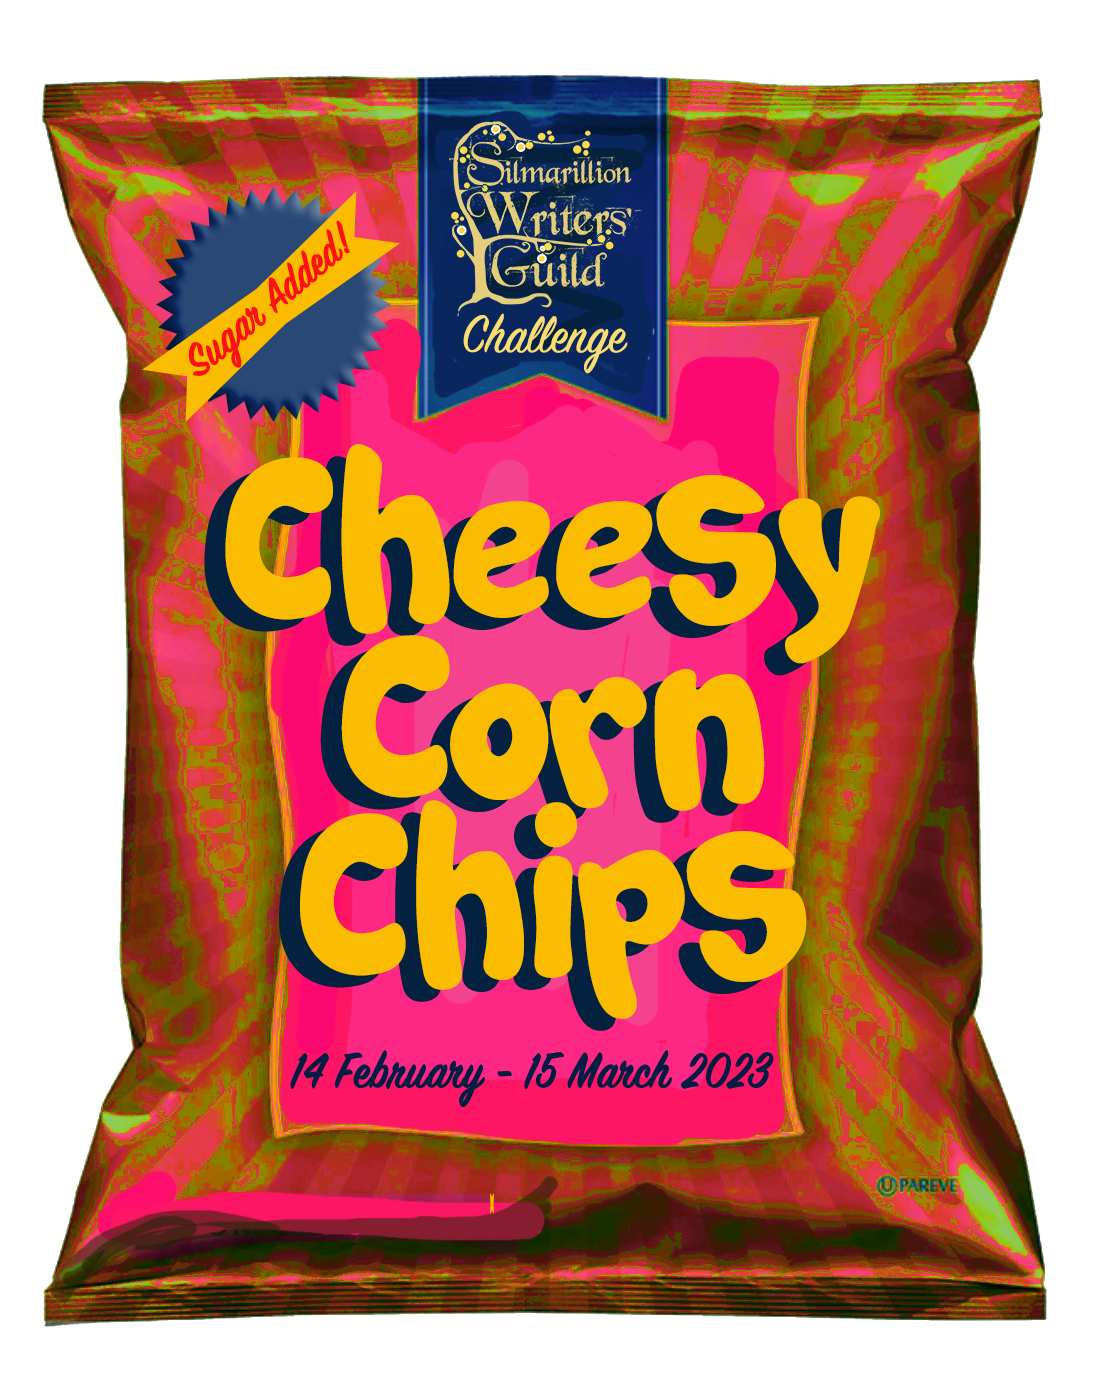 Banner is a bag of chips that reads, "Sugar Added! Silmarillion Writers' Guild Challenge Cheesy Corn Chips, 14 February - 15 March 2023"